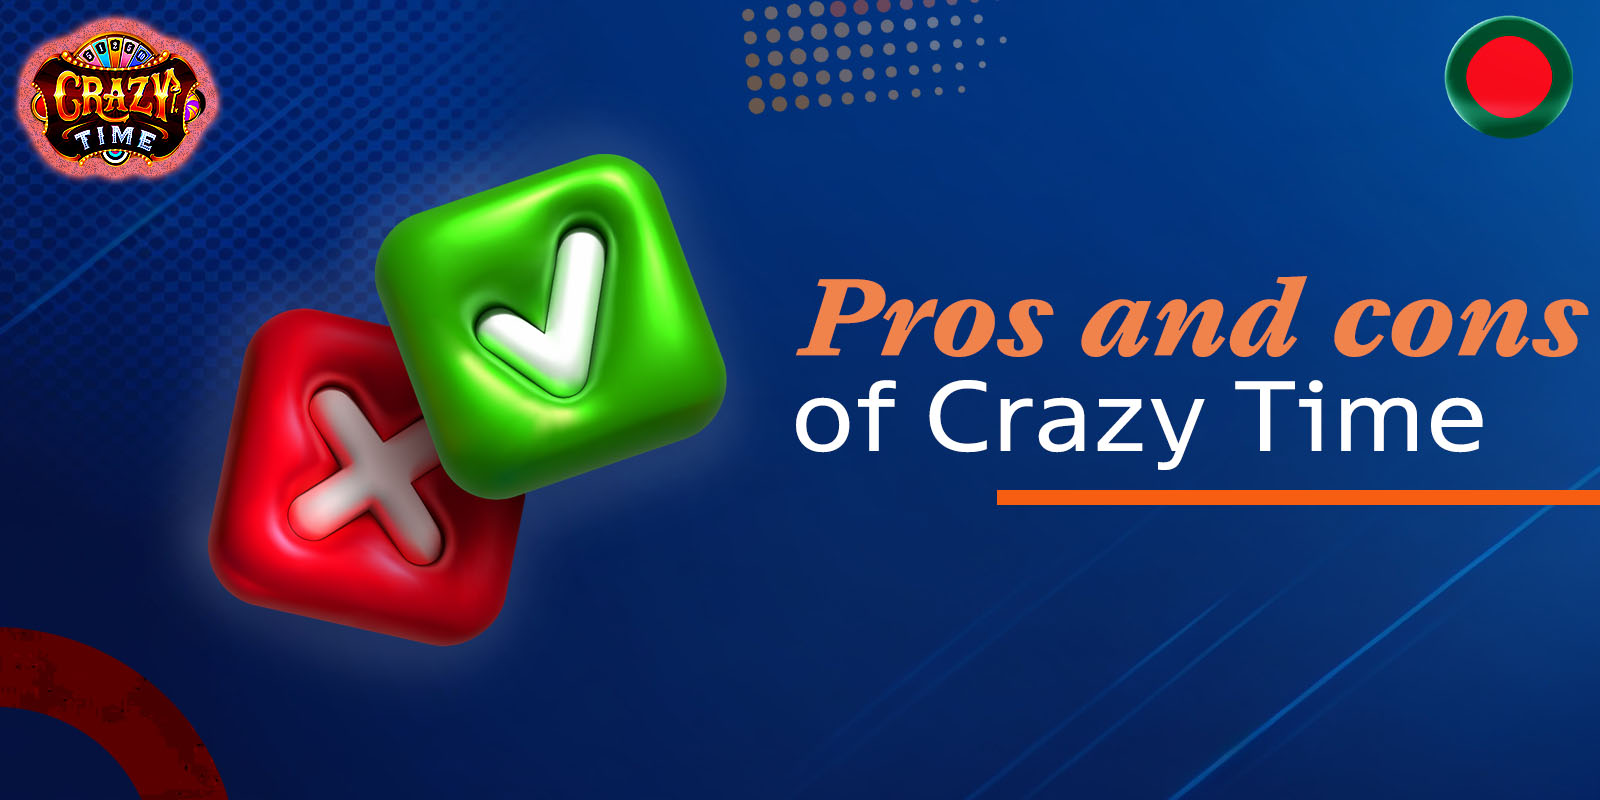 See the pros and cons of Crazy Time